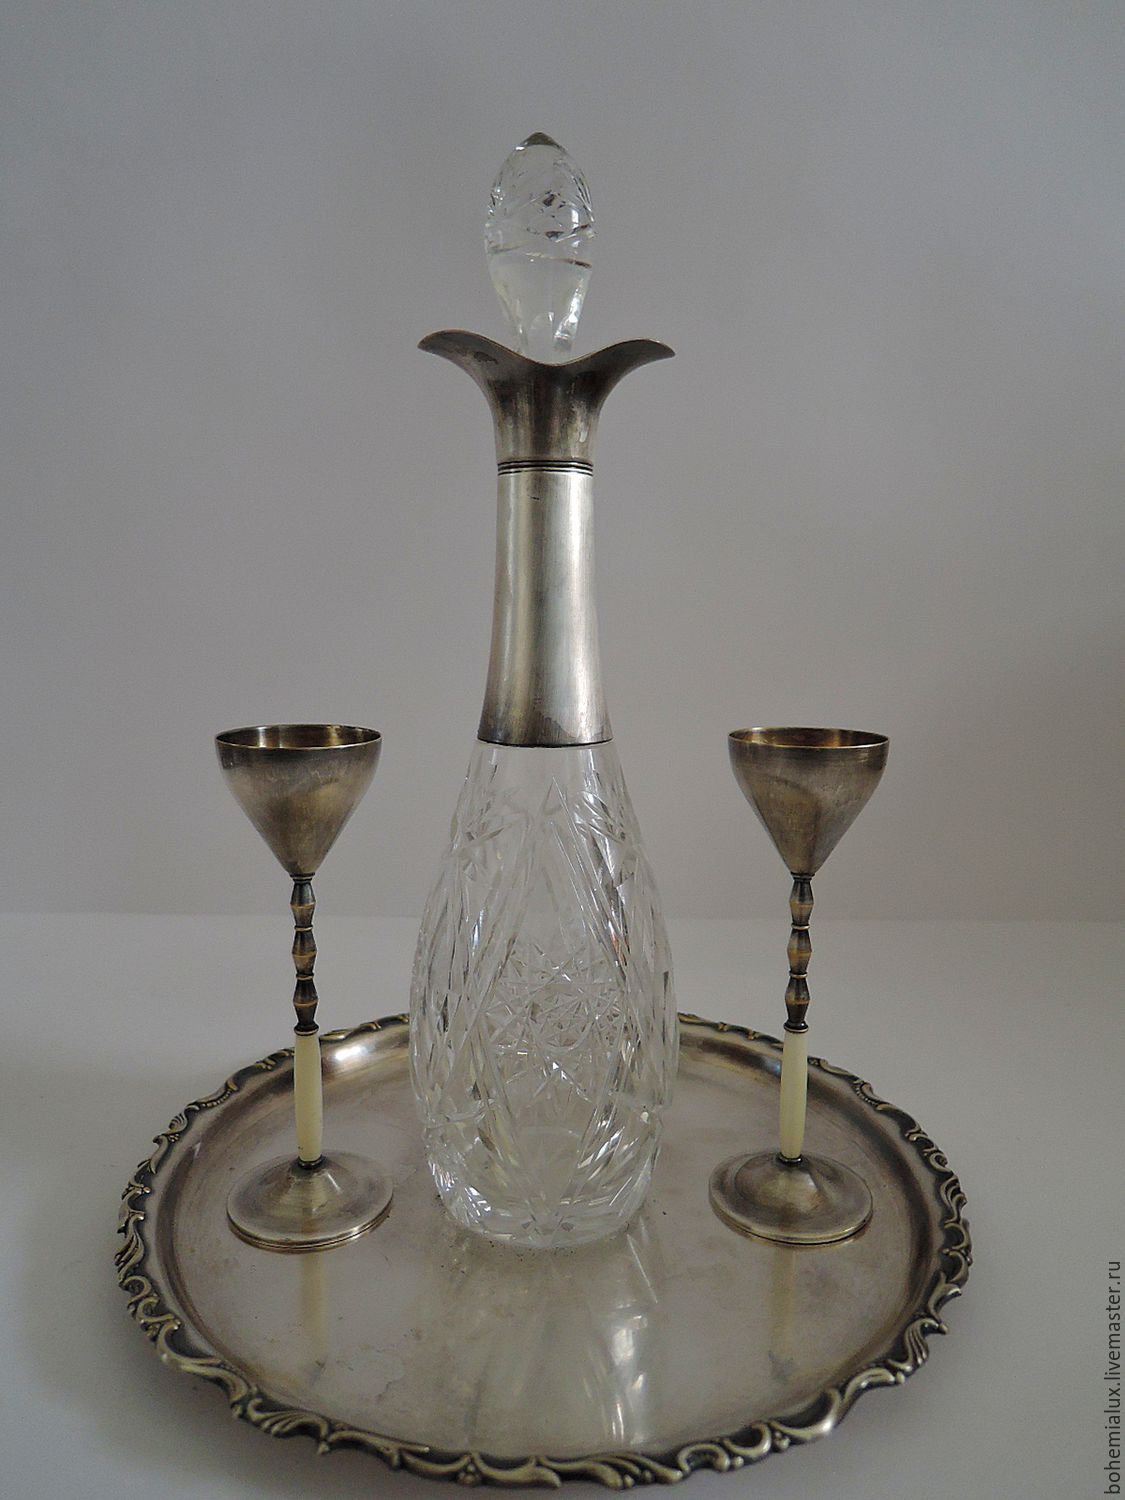 Set Decanter Glasses Tray Crystal Silver Wmf 1910 Shop Online On 